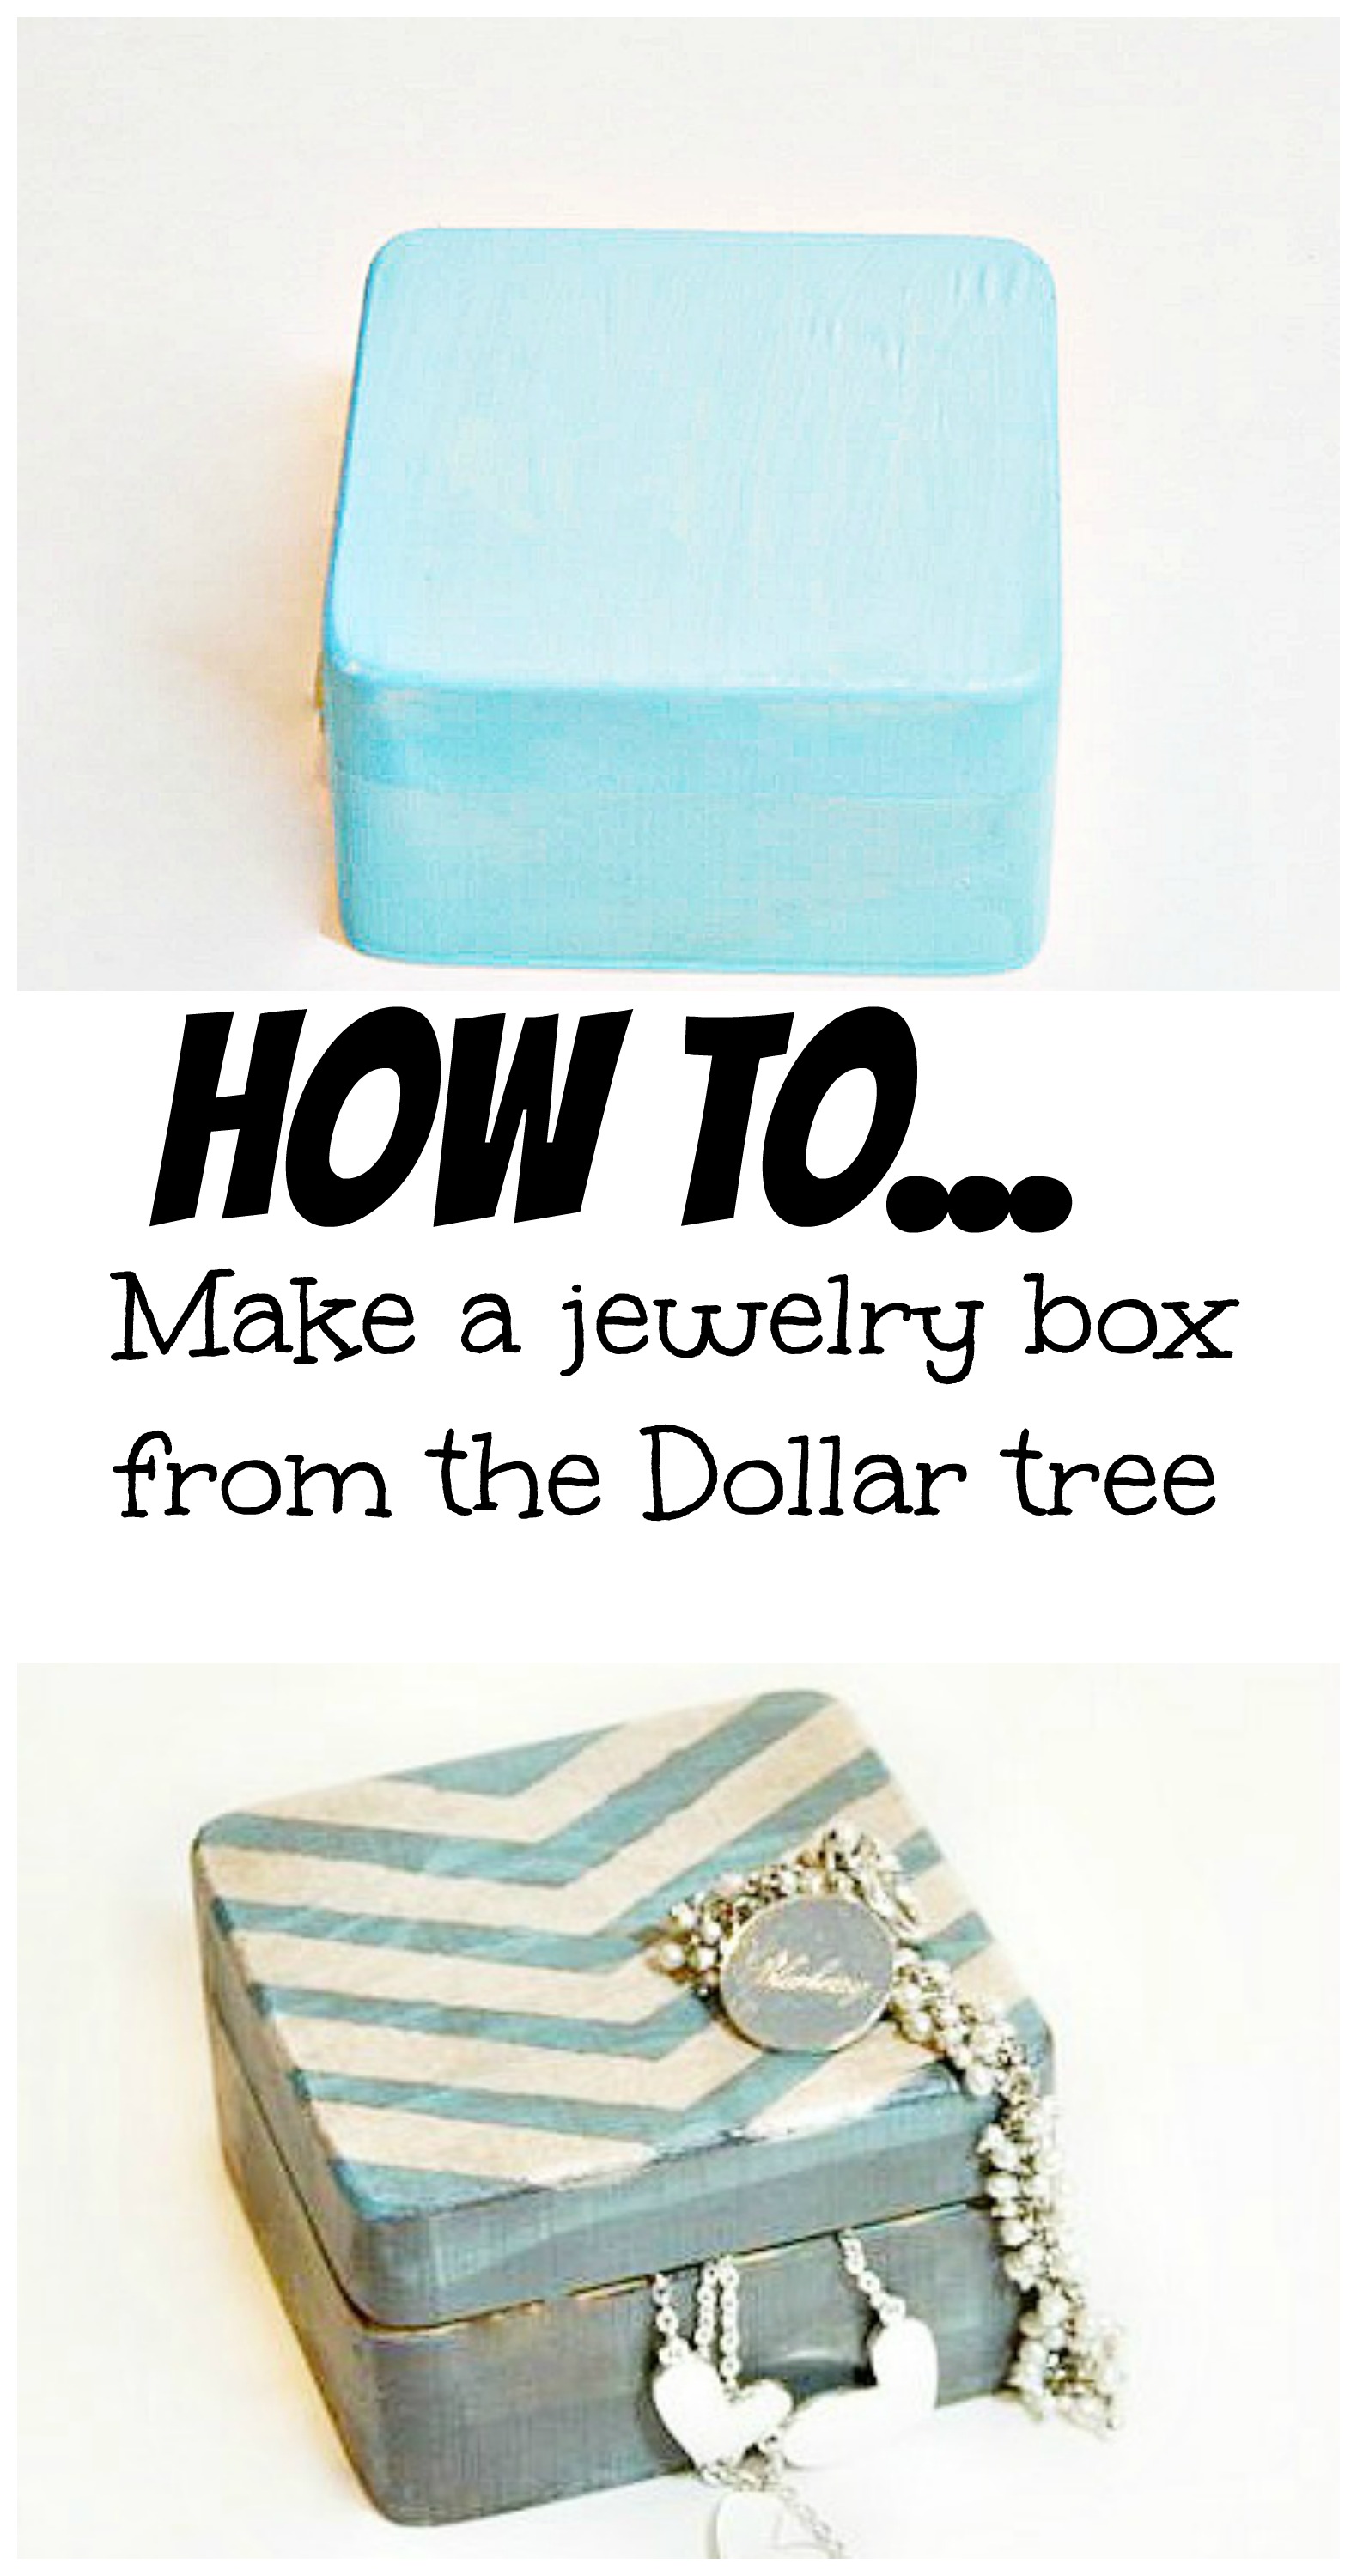 How to make a jewelry box from the dollar tree